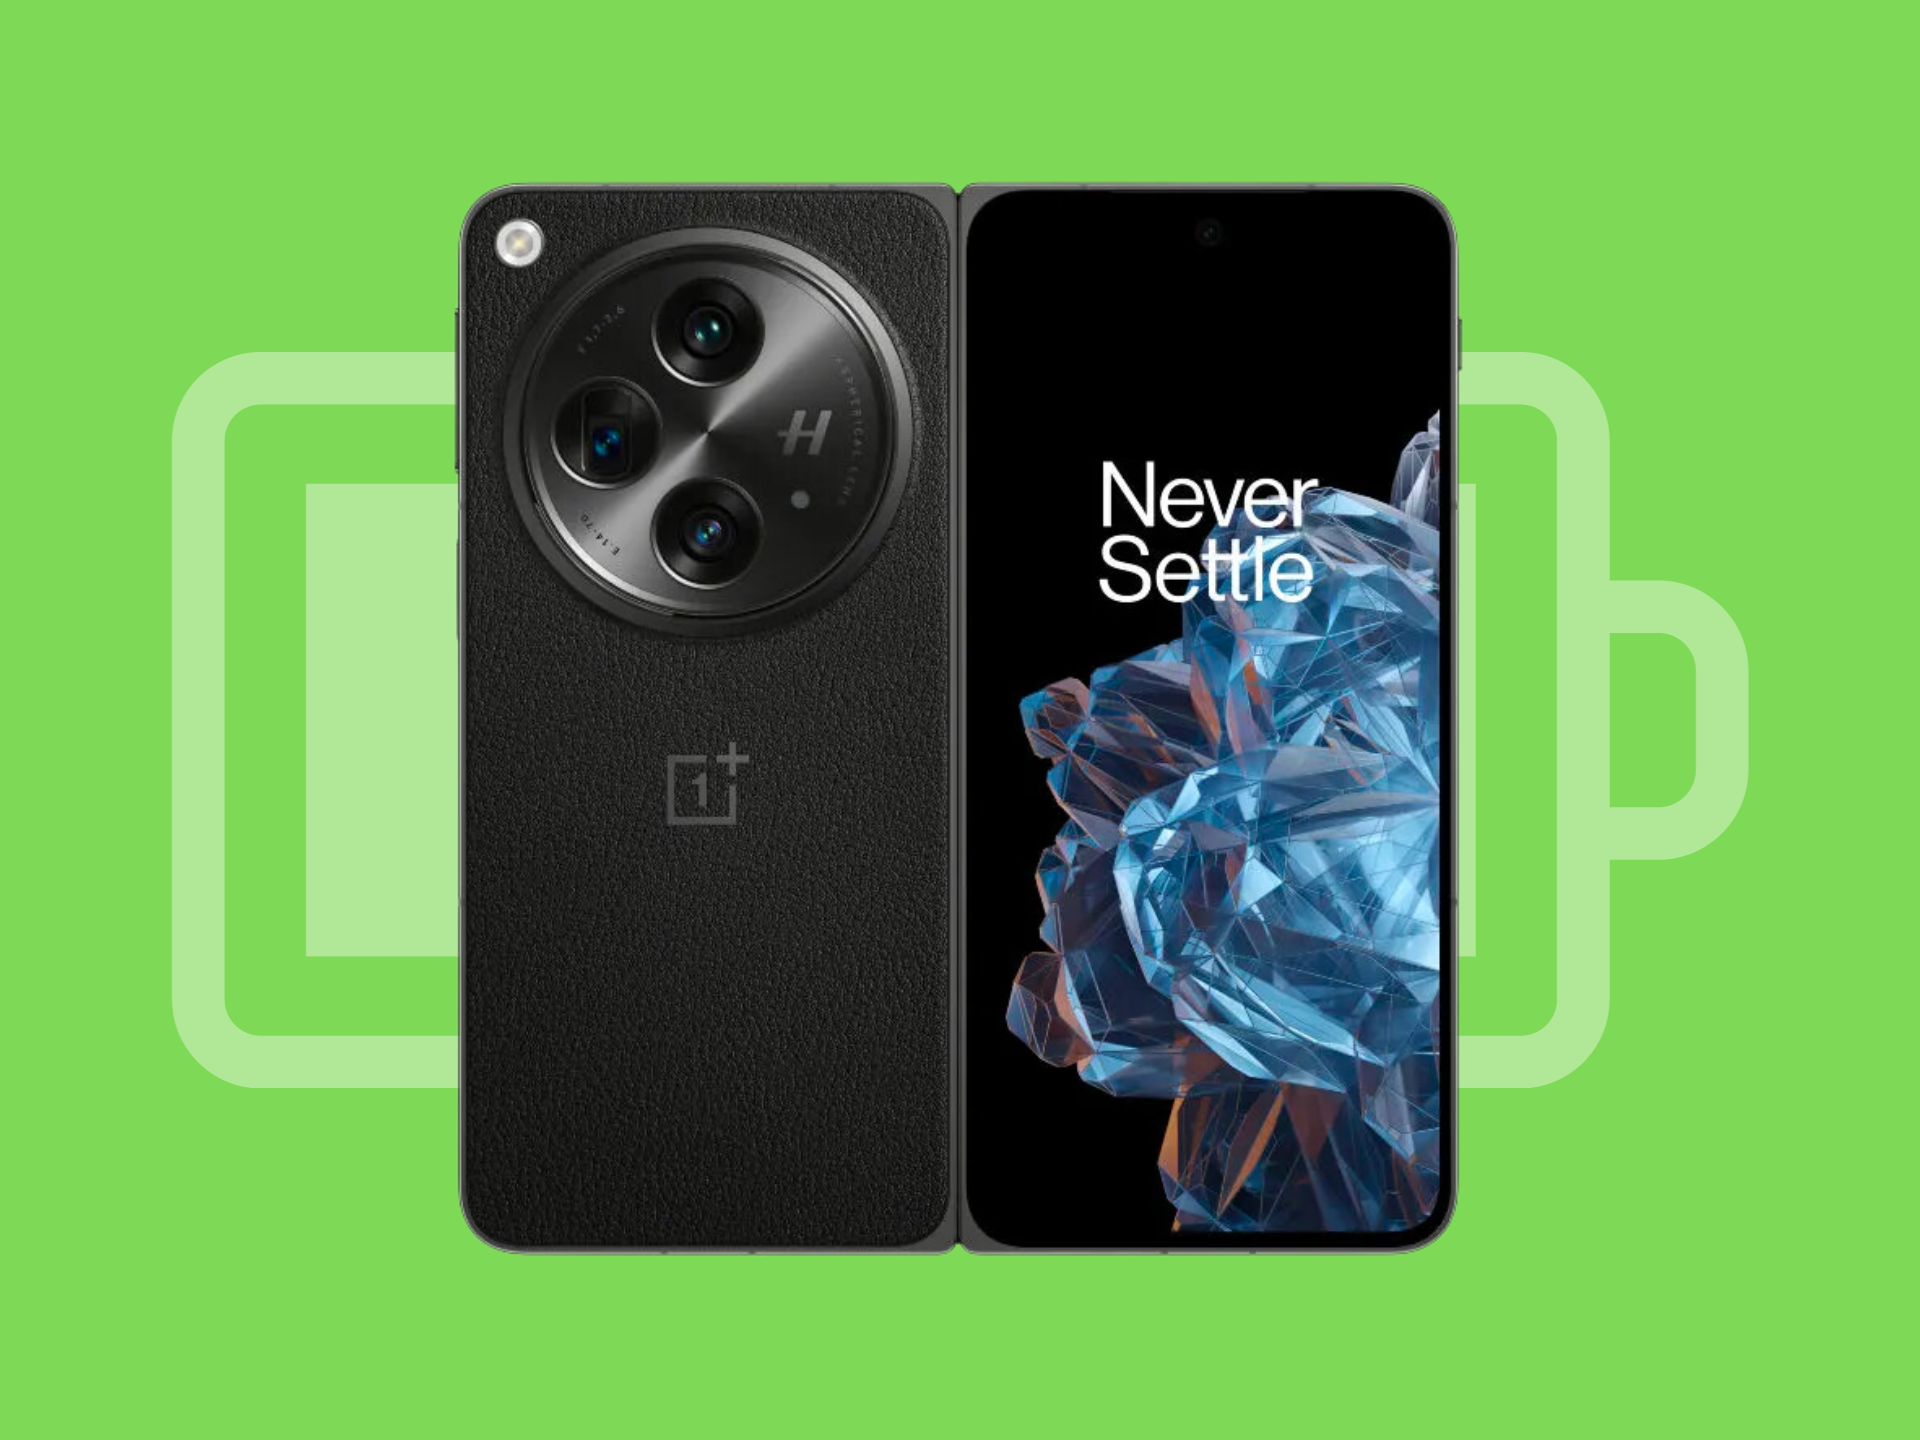 Open for Everything  OnePlus Open Launch Event - OnePlus (United States)